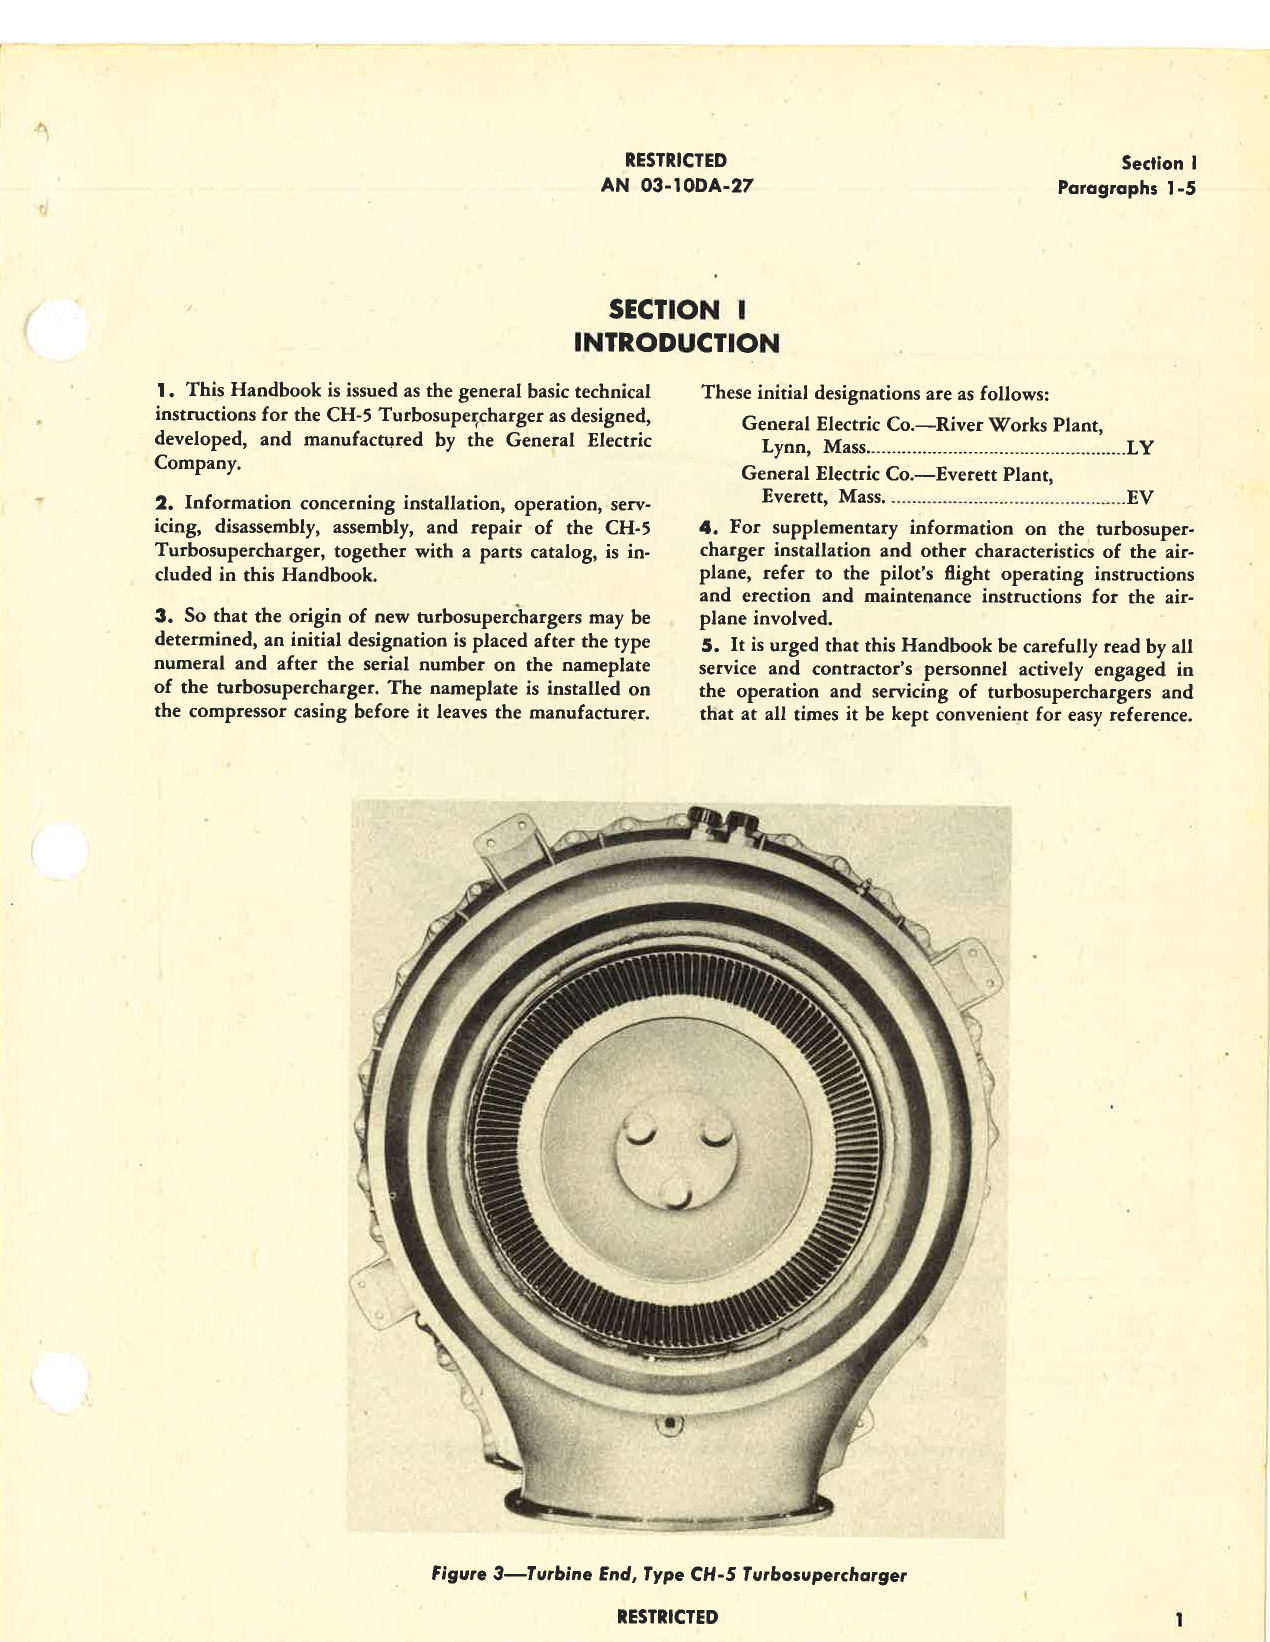 Sample page 5 from AirCorps Library document: Handbook of Instructions with Parts Catalog for Type CH-5 Turbosupercharger